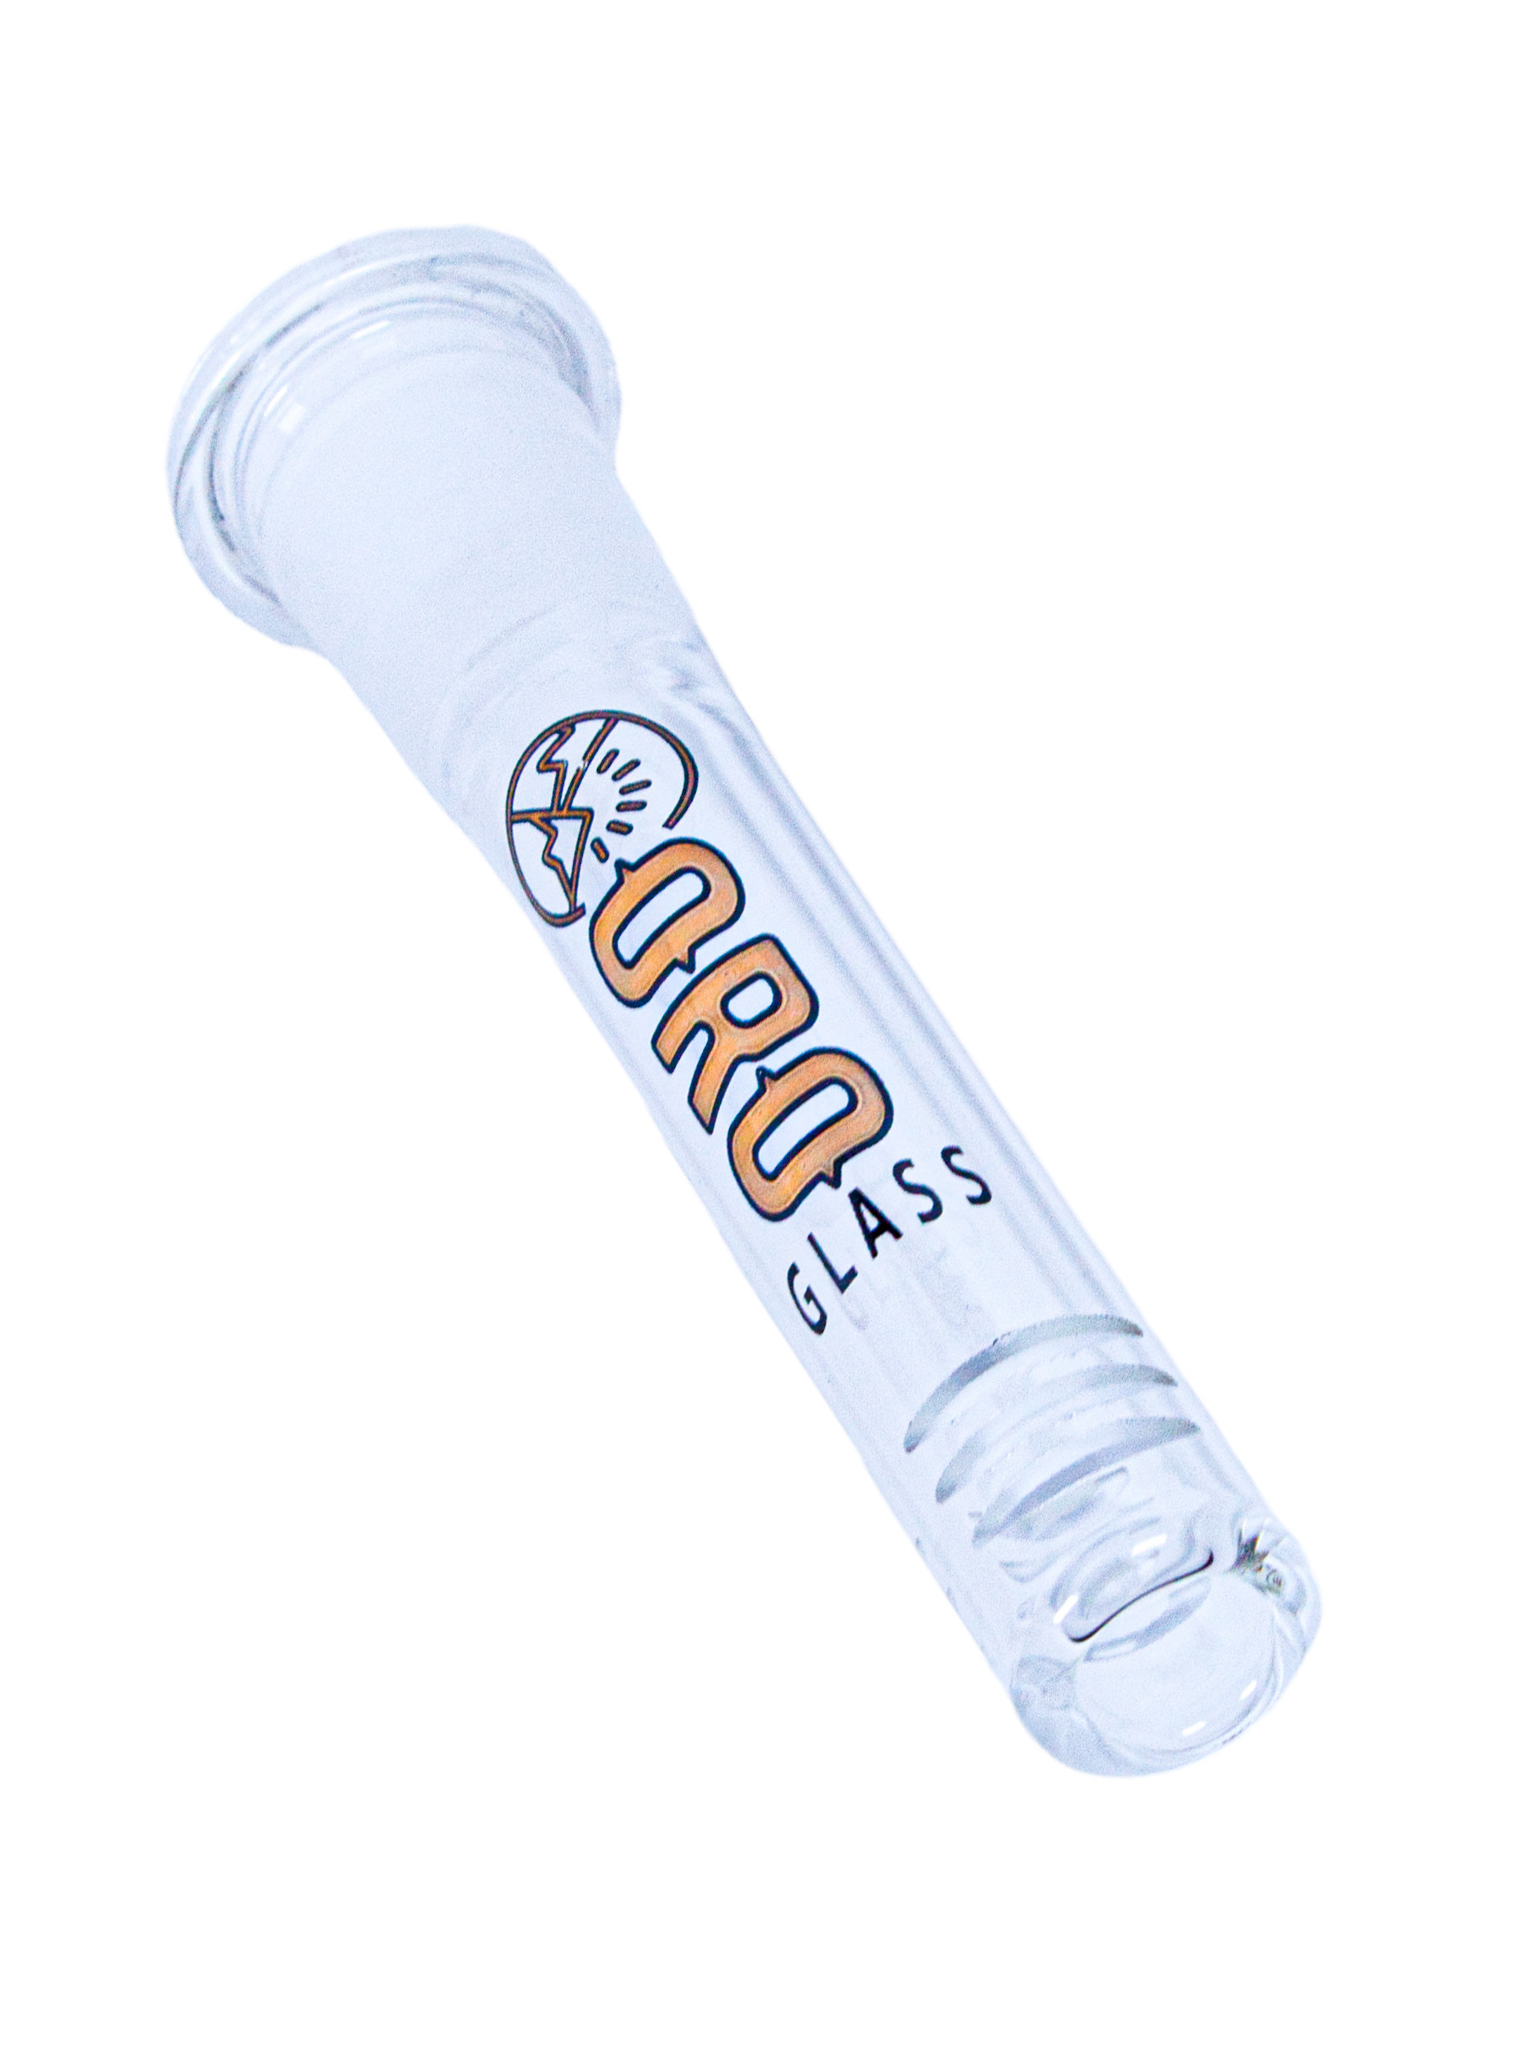 An Oro Glass Company 3-inch 18mm to 14mm Diffused Downstem.